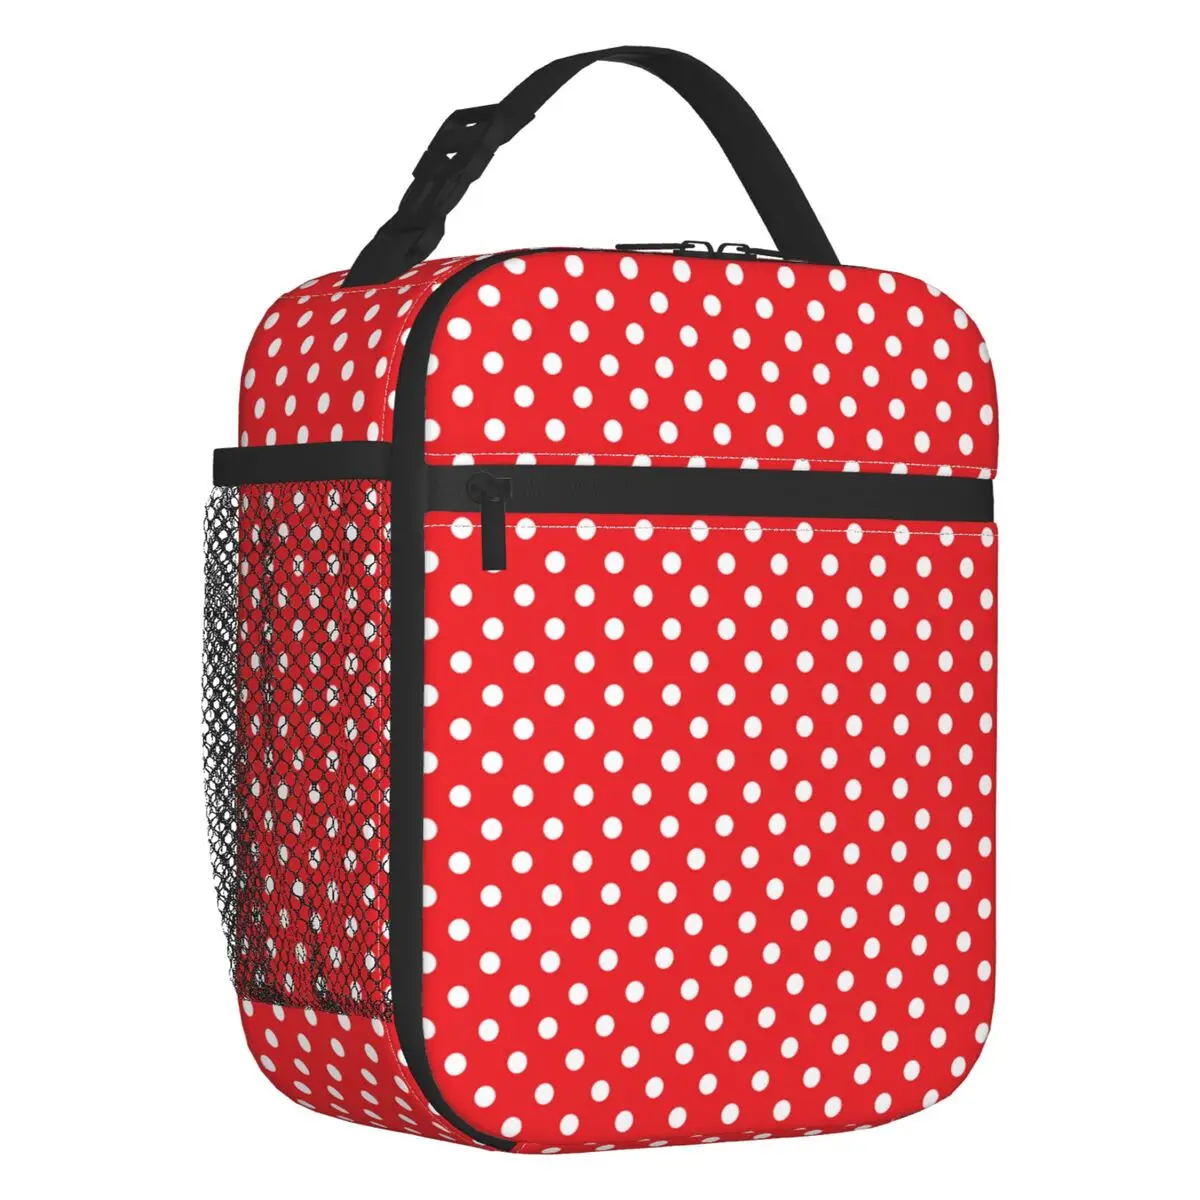 Classic Red And White Polka Dot Insulated Lunch Bag for Women Portable Cooler Thermal Lunch Box Office Work School